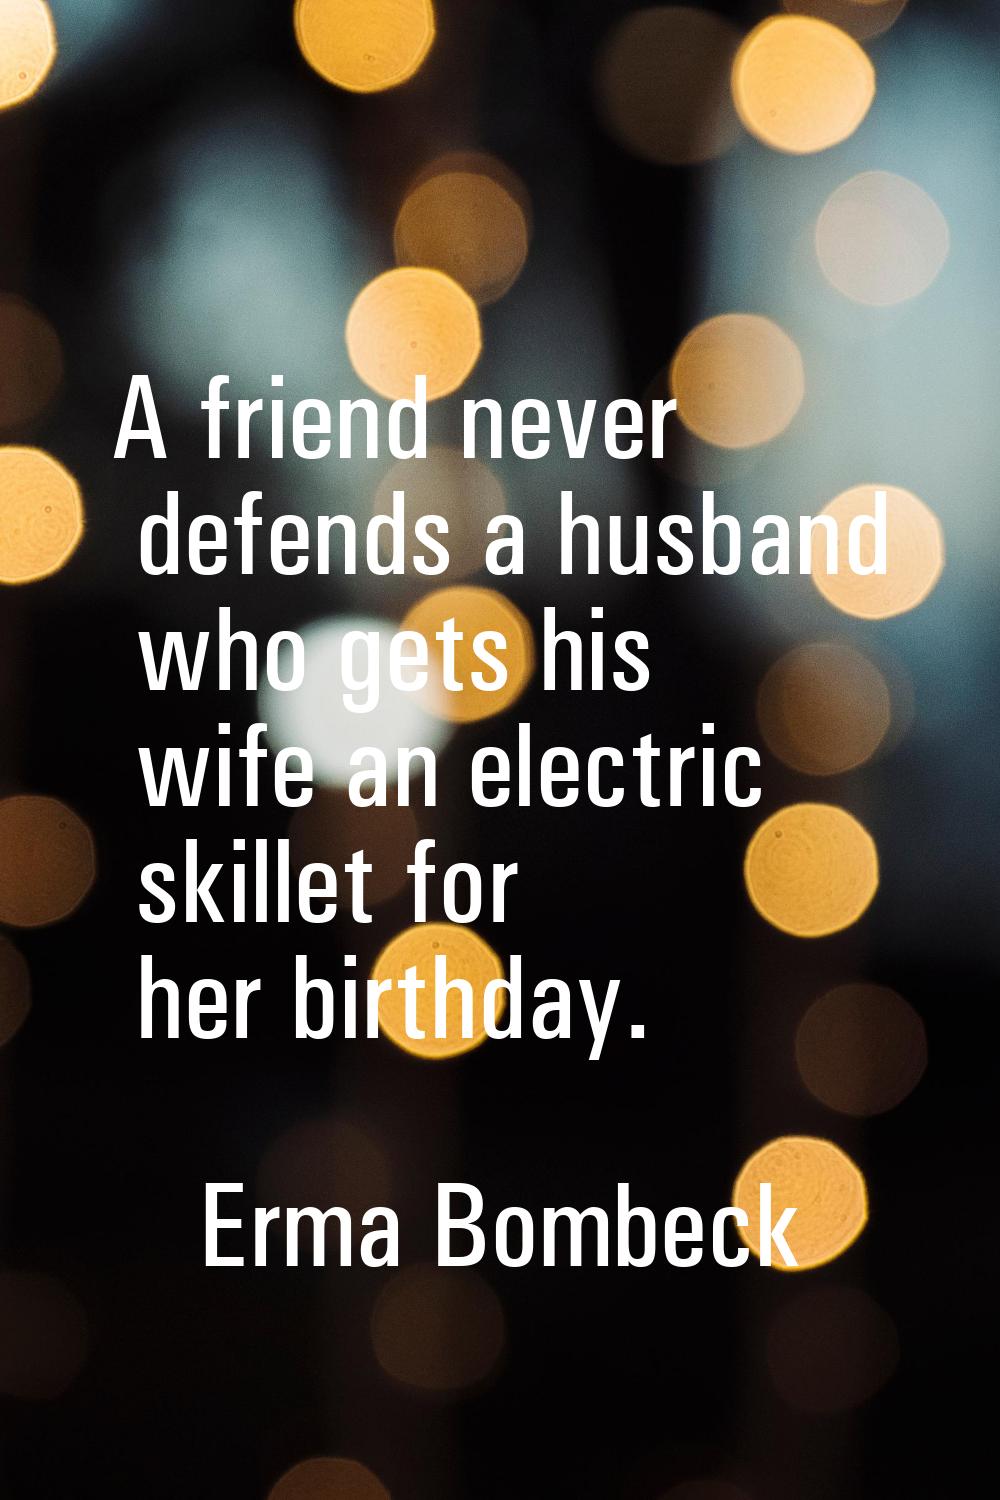 A friend never defends a husband who gets his wife an electric skillet for her birthday.